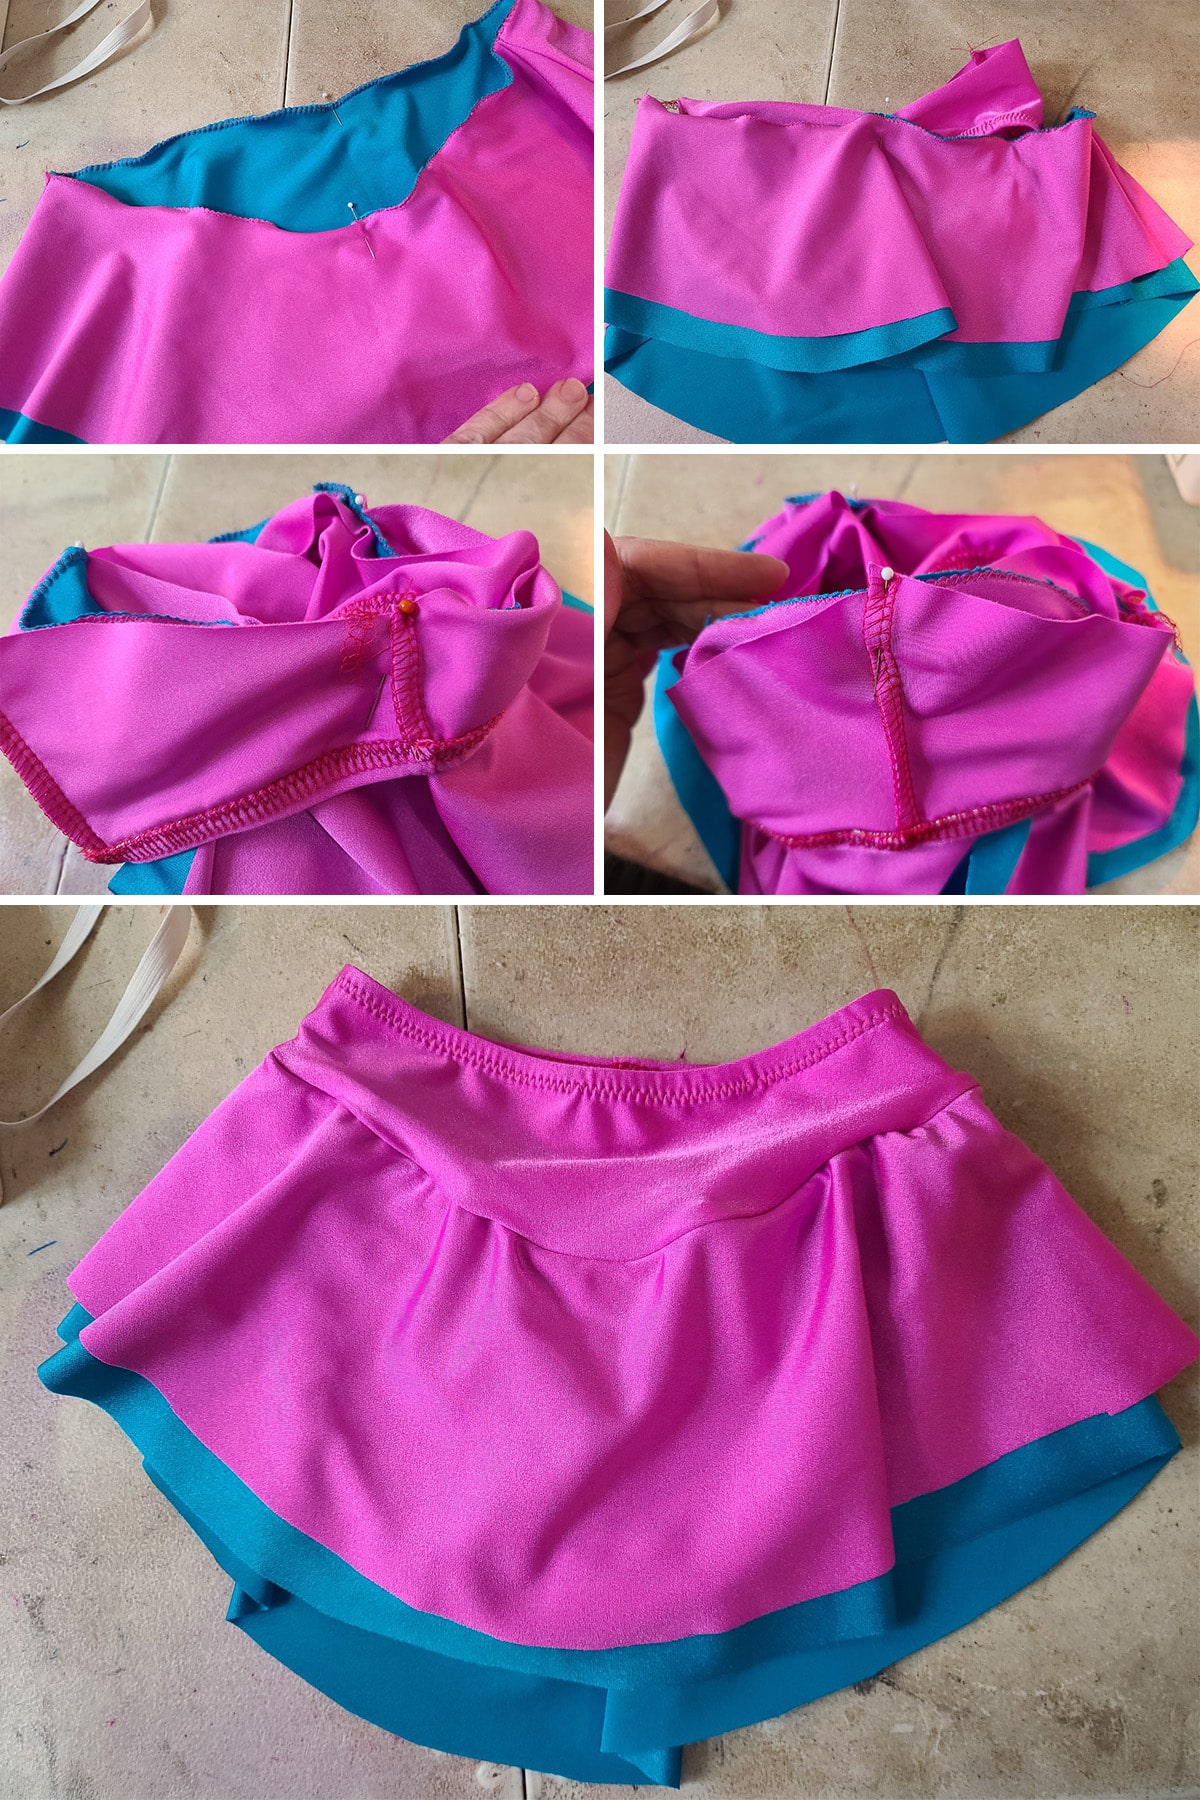 A 5 part image showing a pink figure skating skirt with blue and pink skirt layers being sewn together as described.